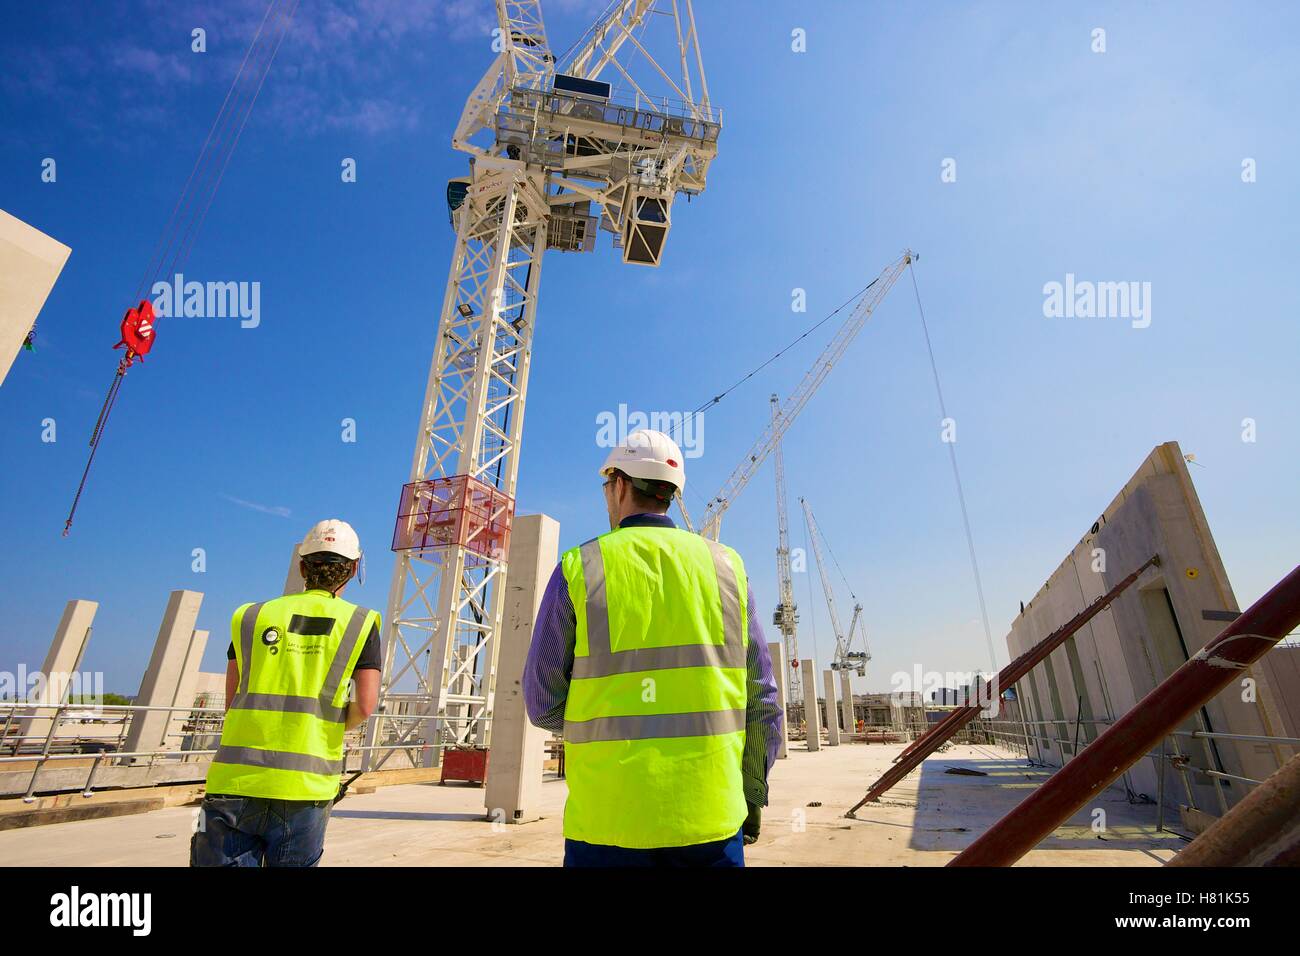 Workers wearing safety clothing watching construction using tower cranes. Stock Photo